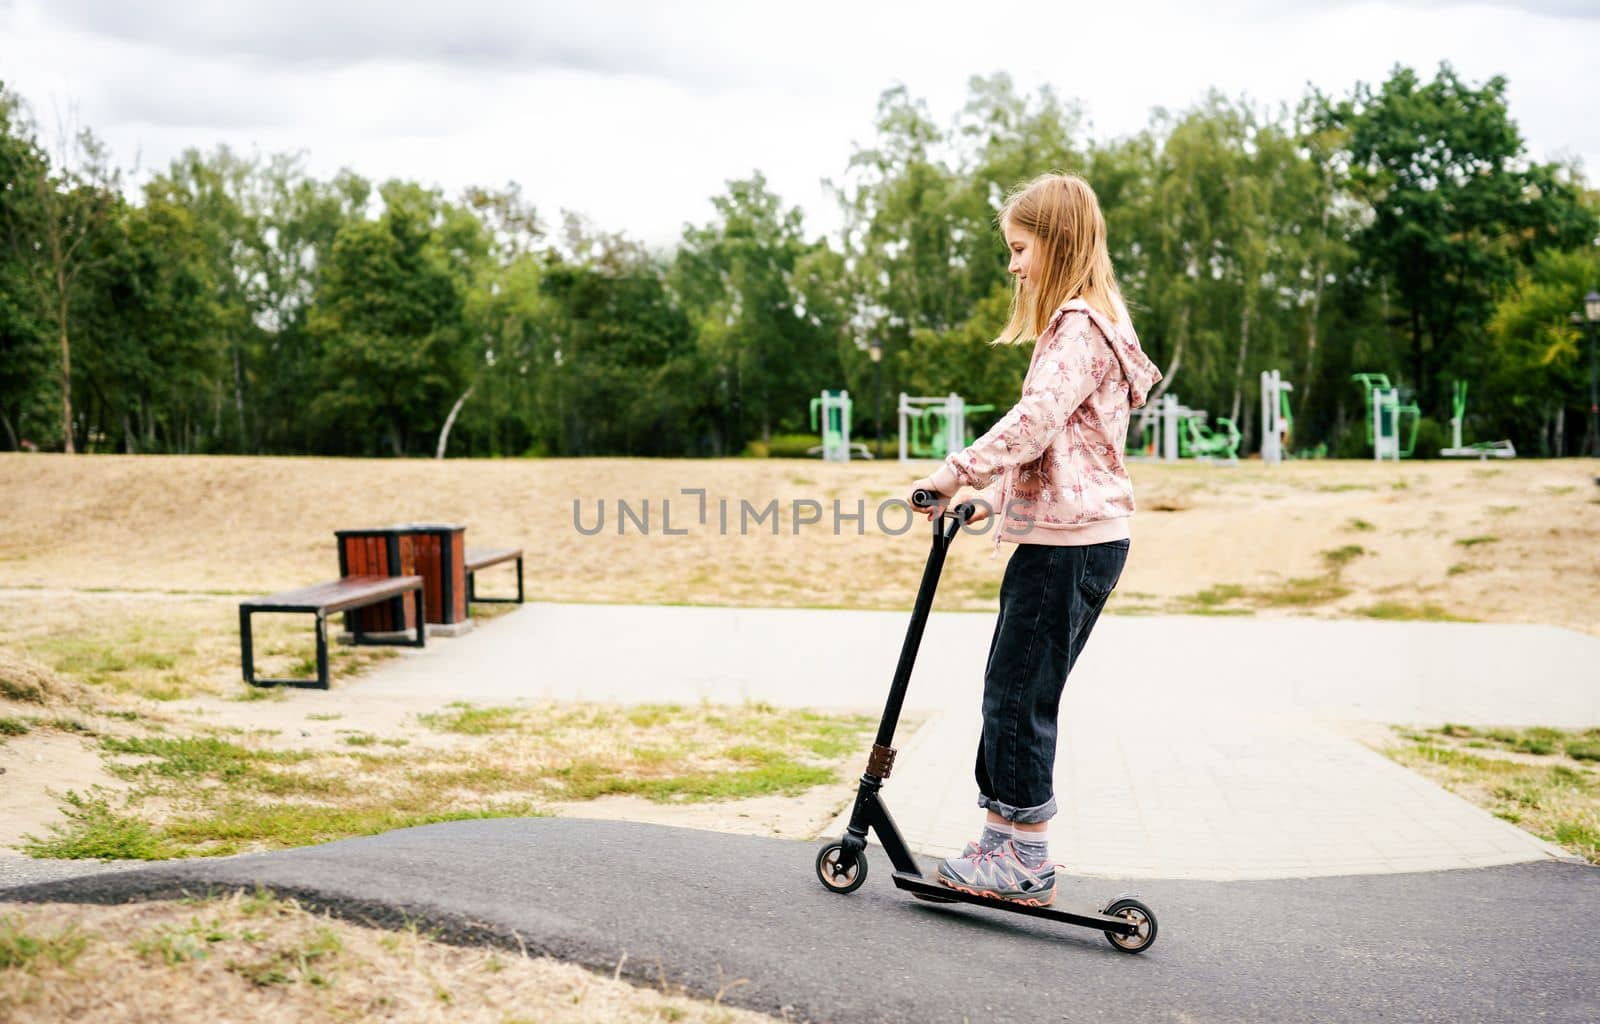 Preteen girl riding scooter in the park. Cute female child with eco vehicle outdoors